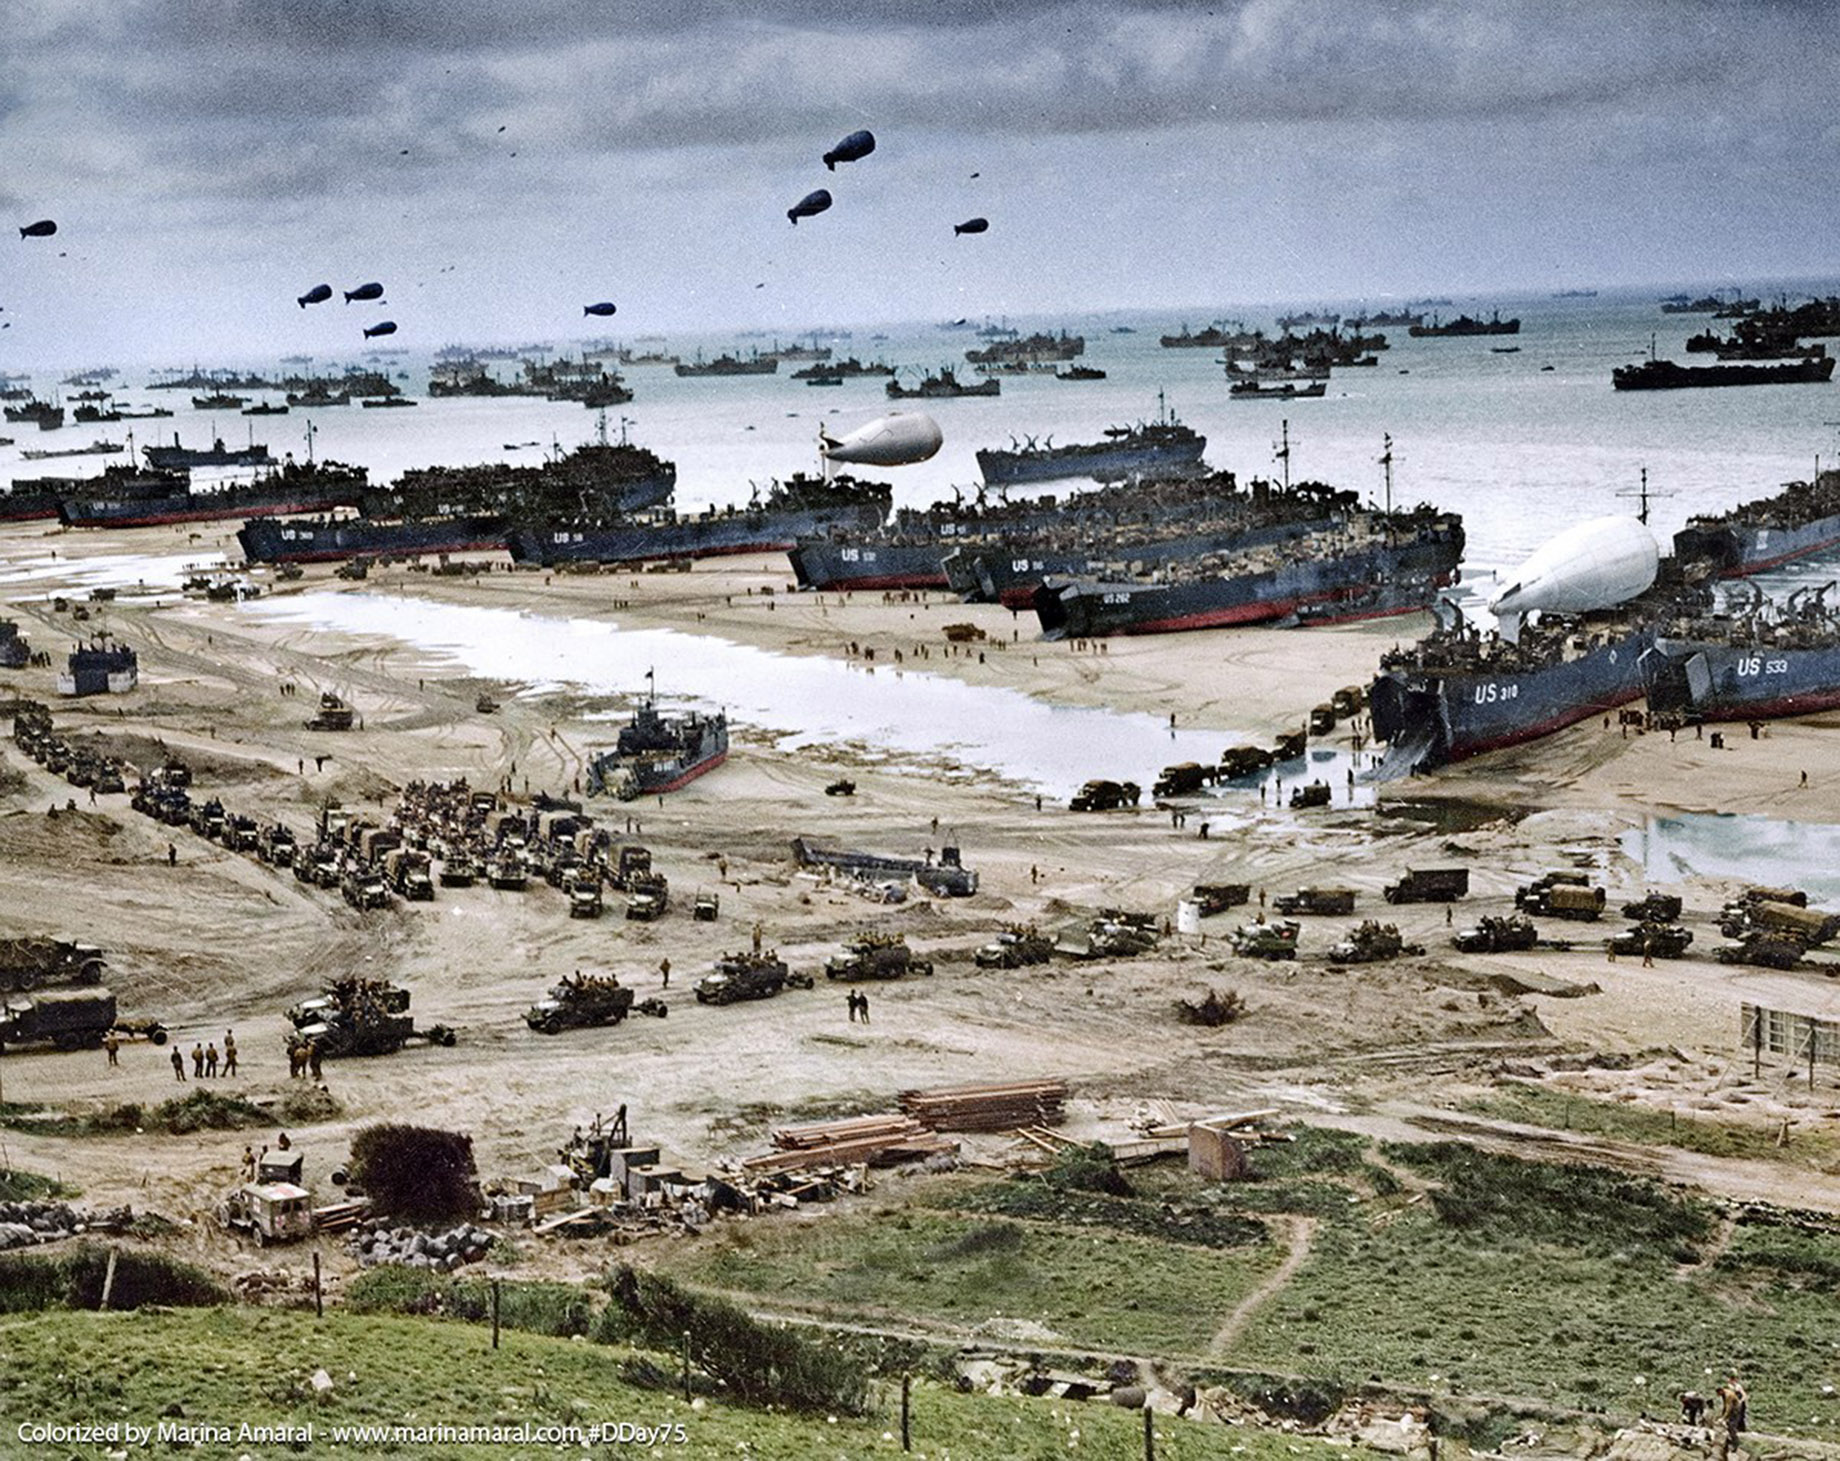 D-Day Normandy Beach Operation Overlord Landing Site During World War II on Tuesday, June 6, 1944